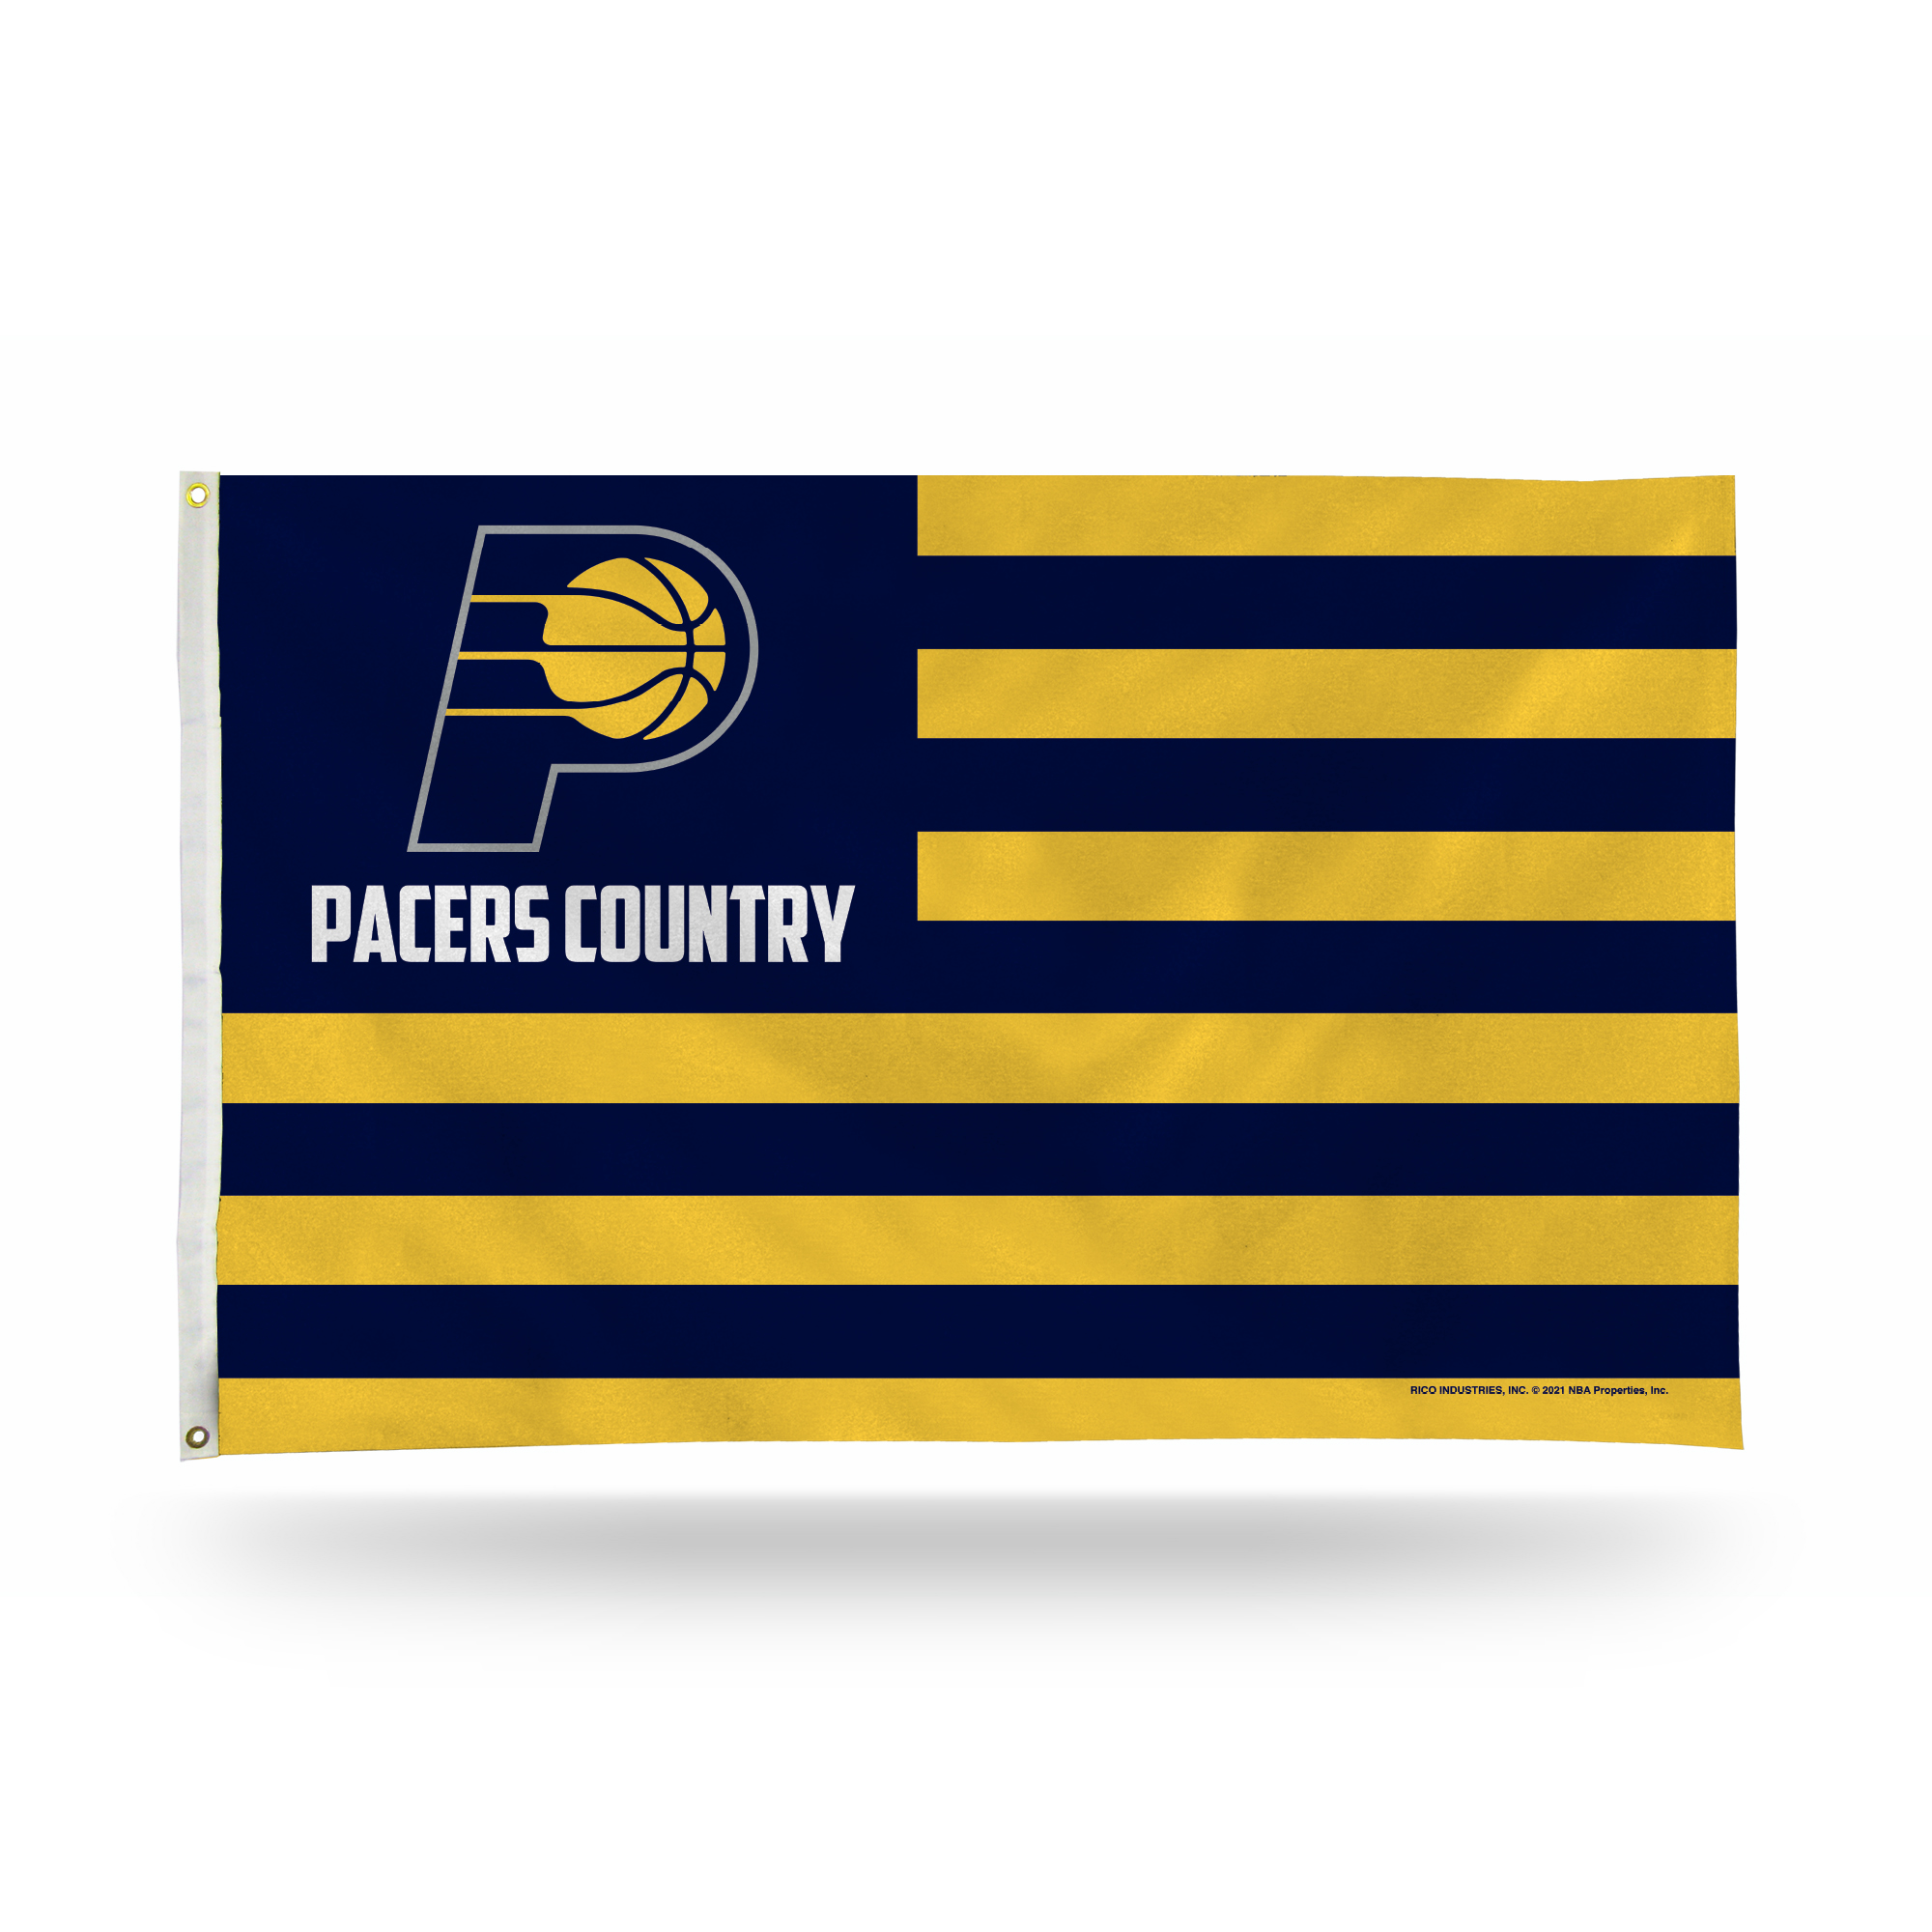 Rico Industries NBA Basketball Indiana Pacers Country 3' x 5' Banner Flag